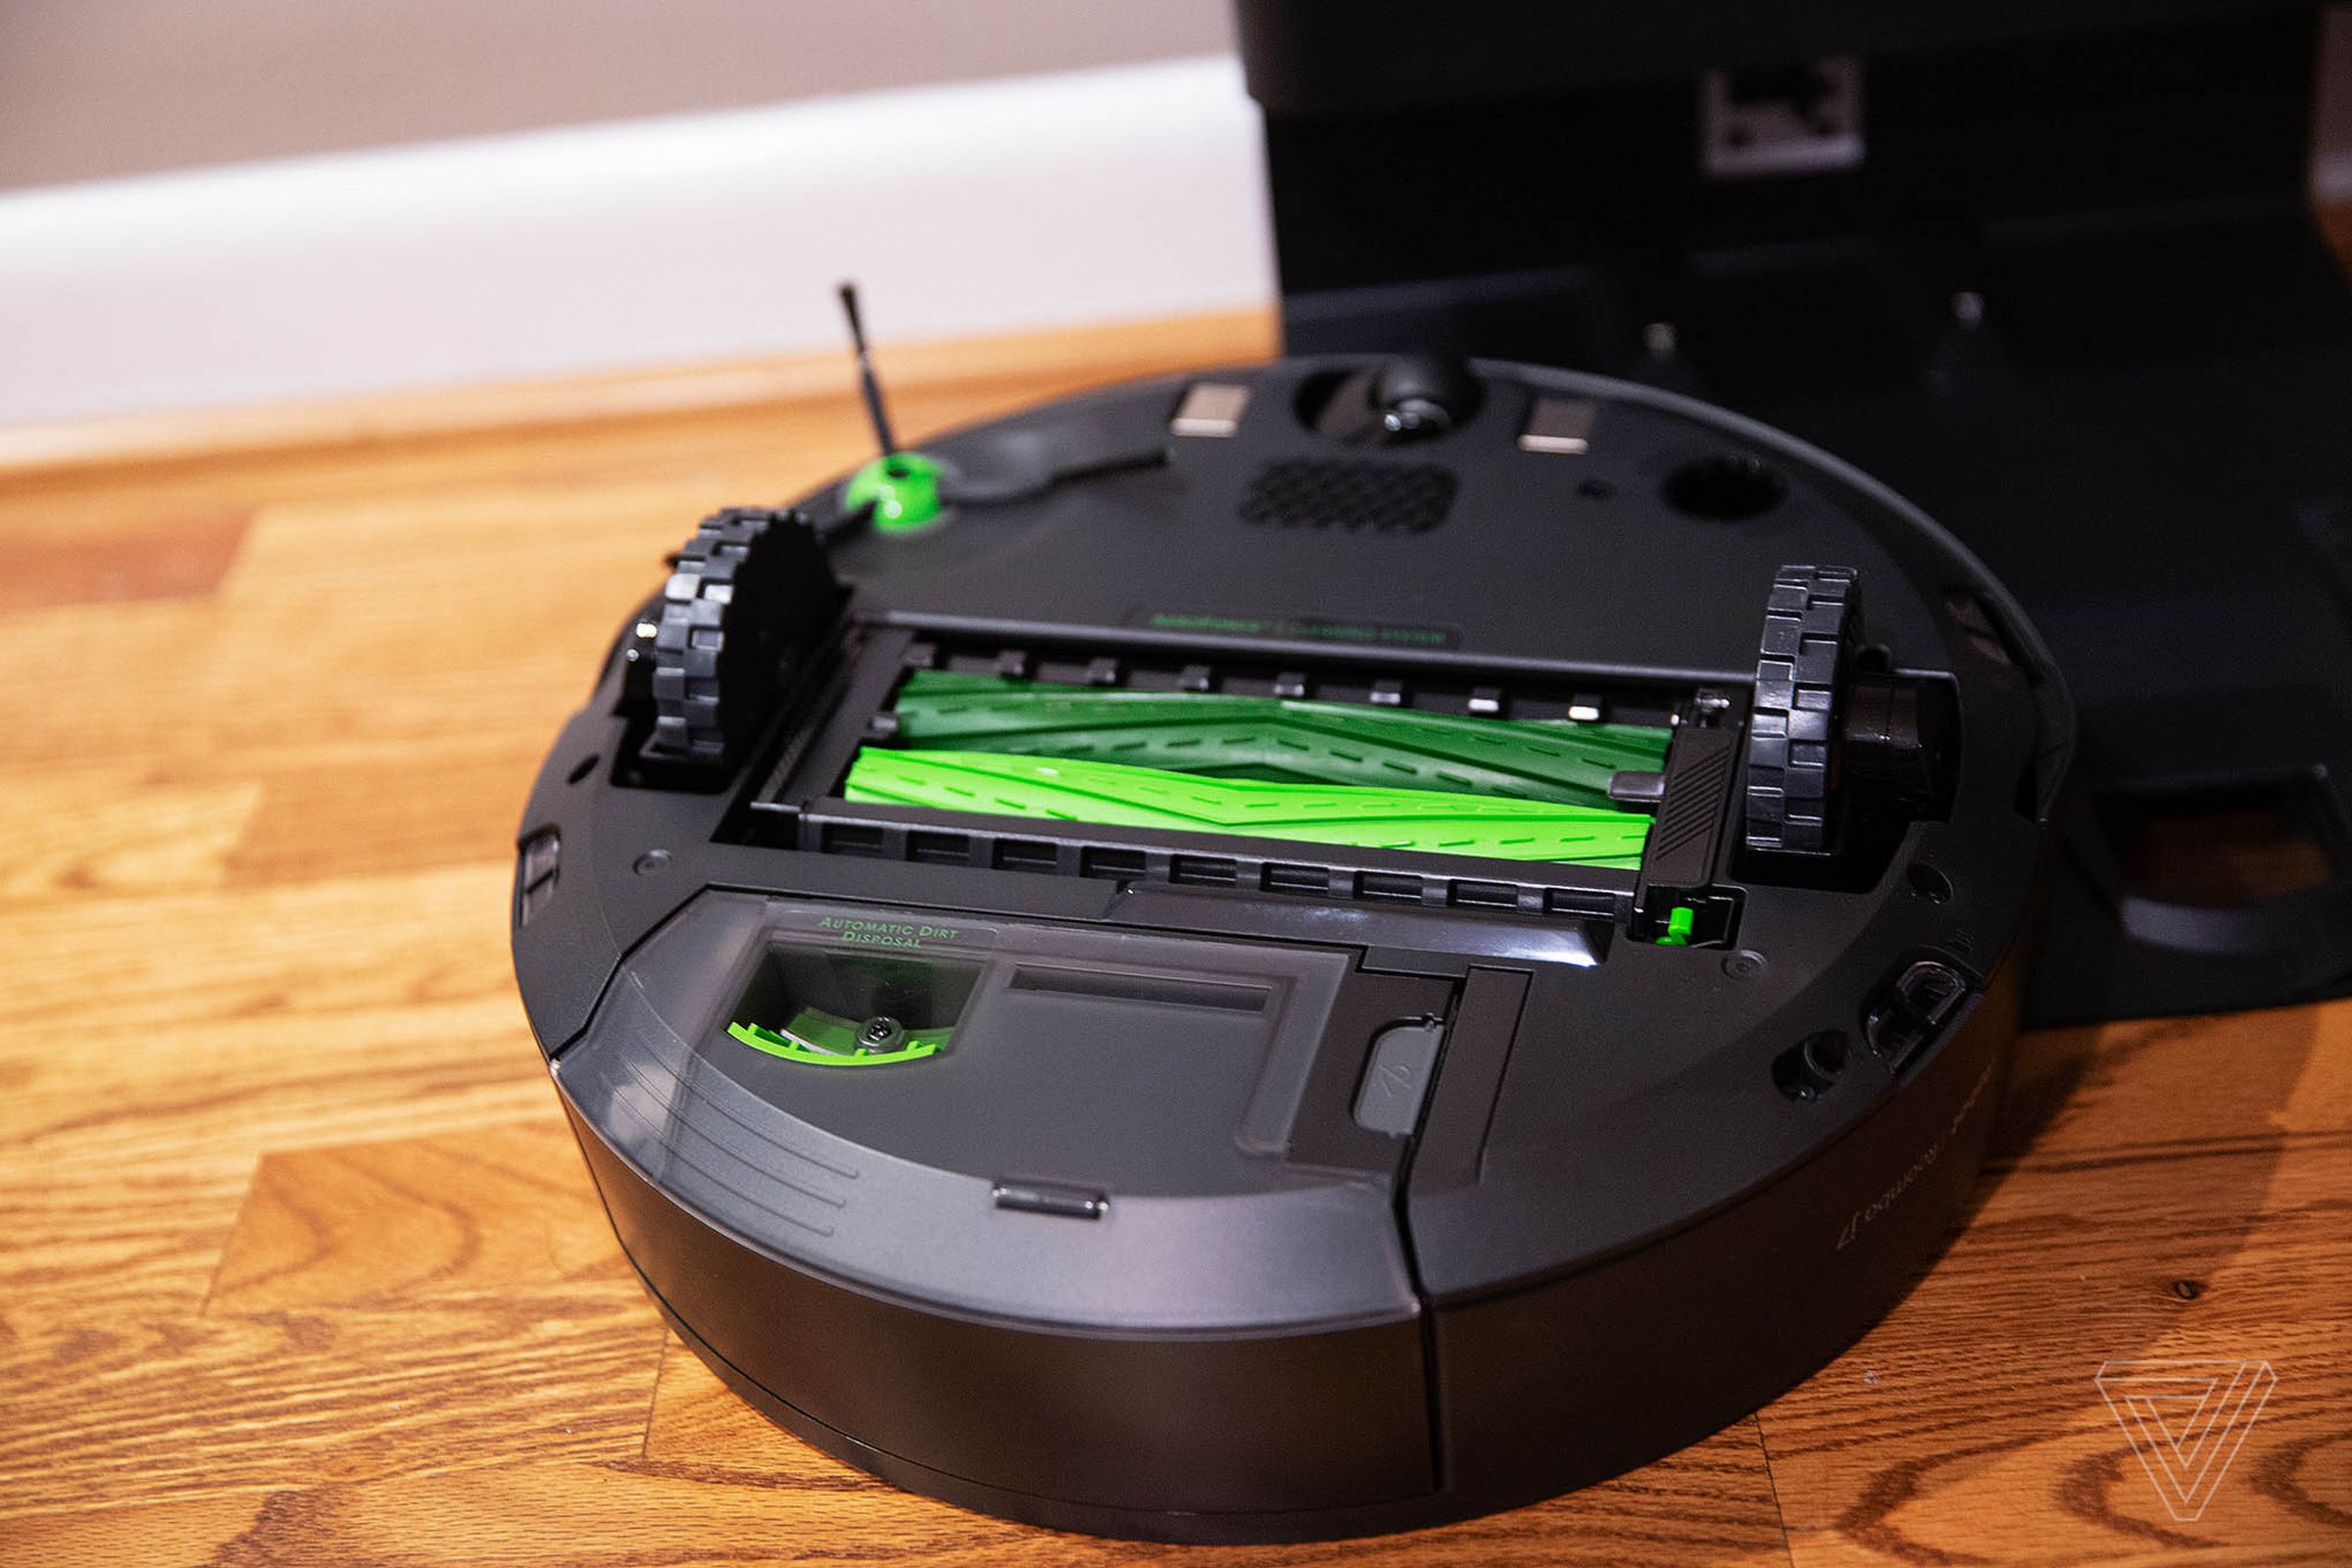 The Roomba has smaller wheels than the JetBot, but it still managed high thresholds. It uses a side brush and two rubber brushes for sucking up dirt.